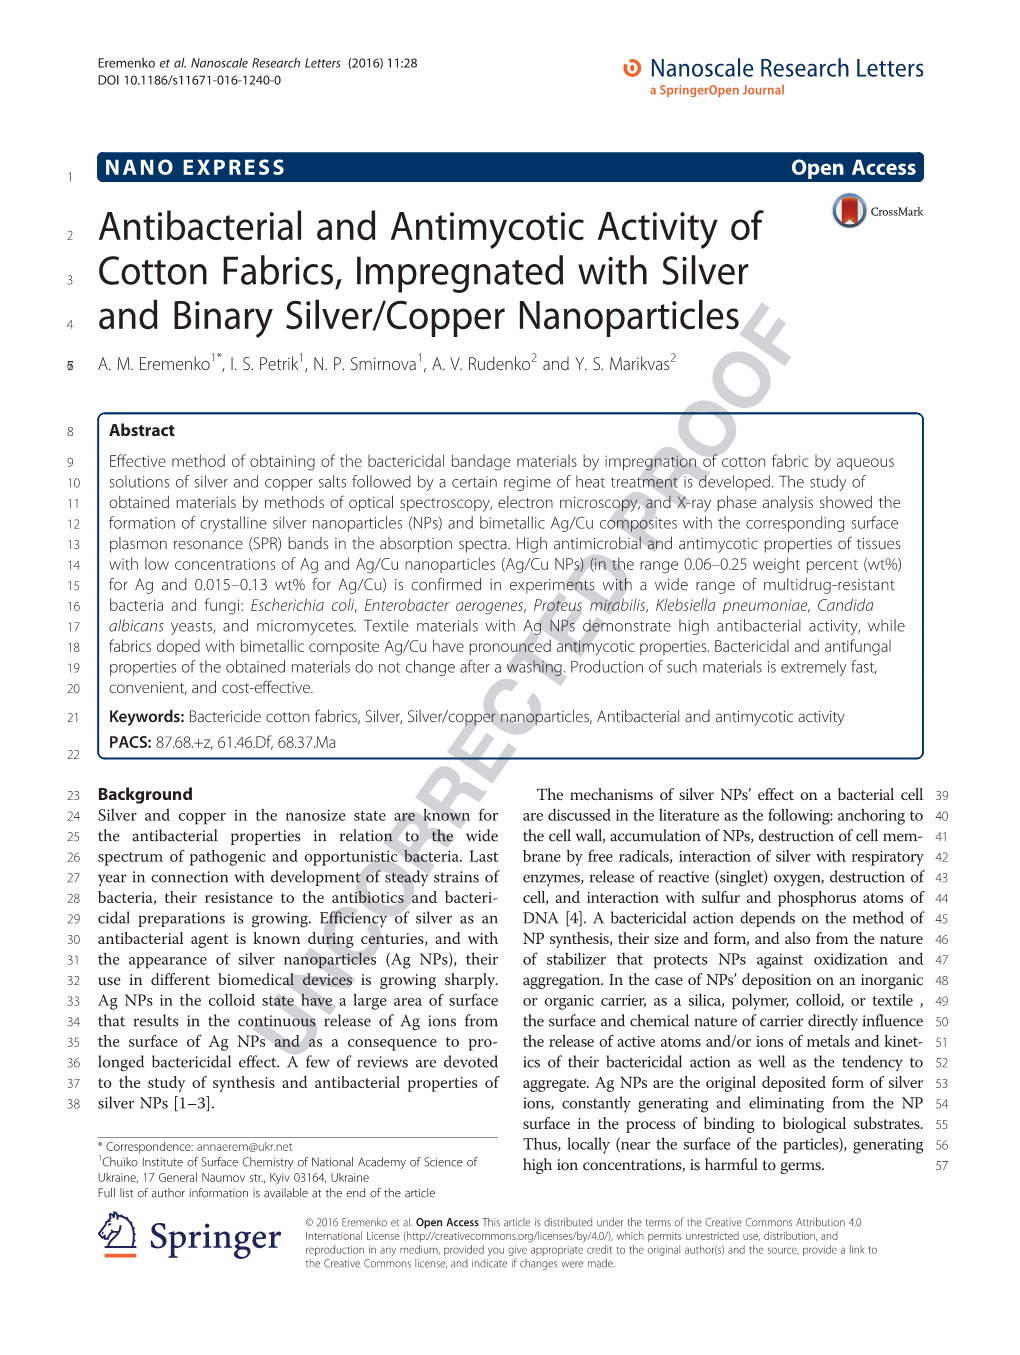 Antibacterial and Antimycotic Activity of Cotton Fabrics, Impregnated With